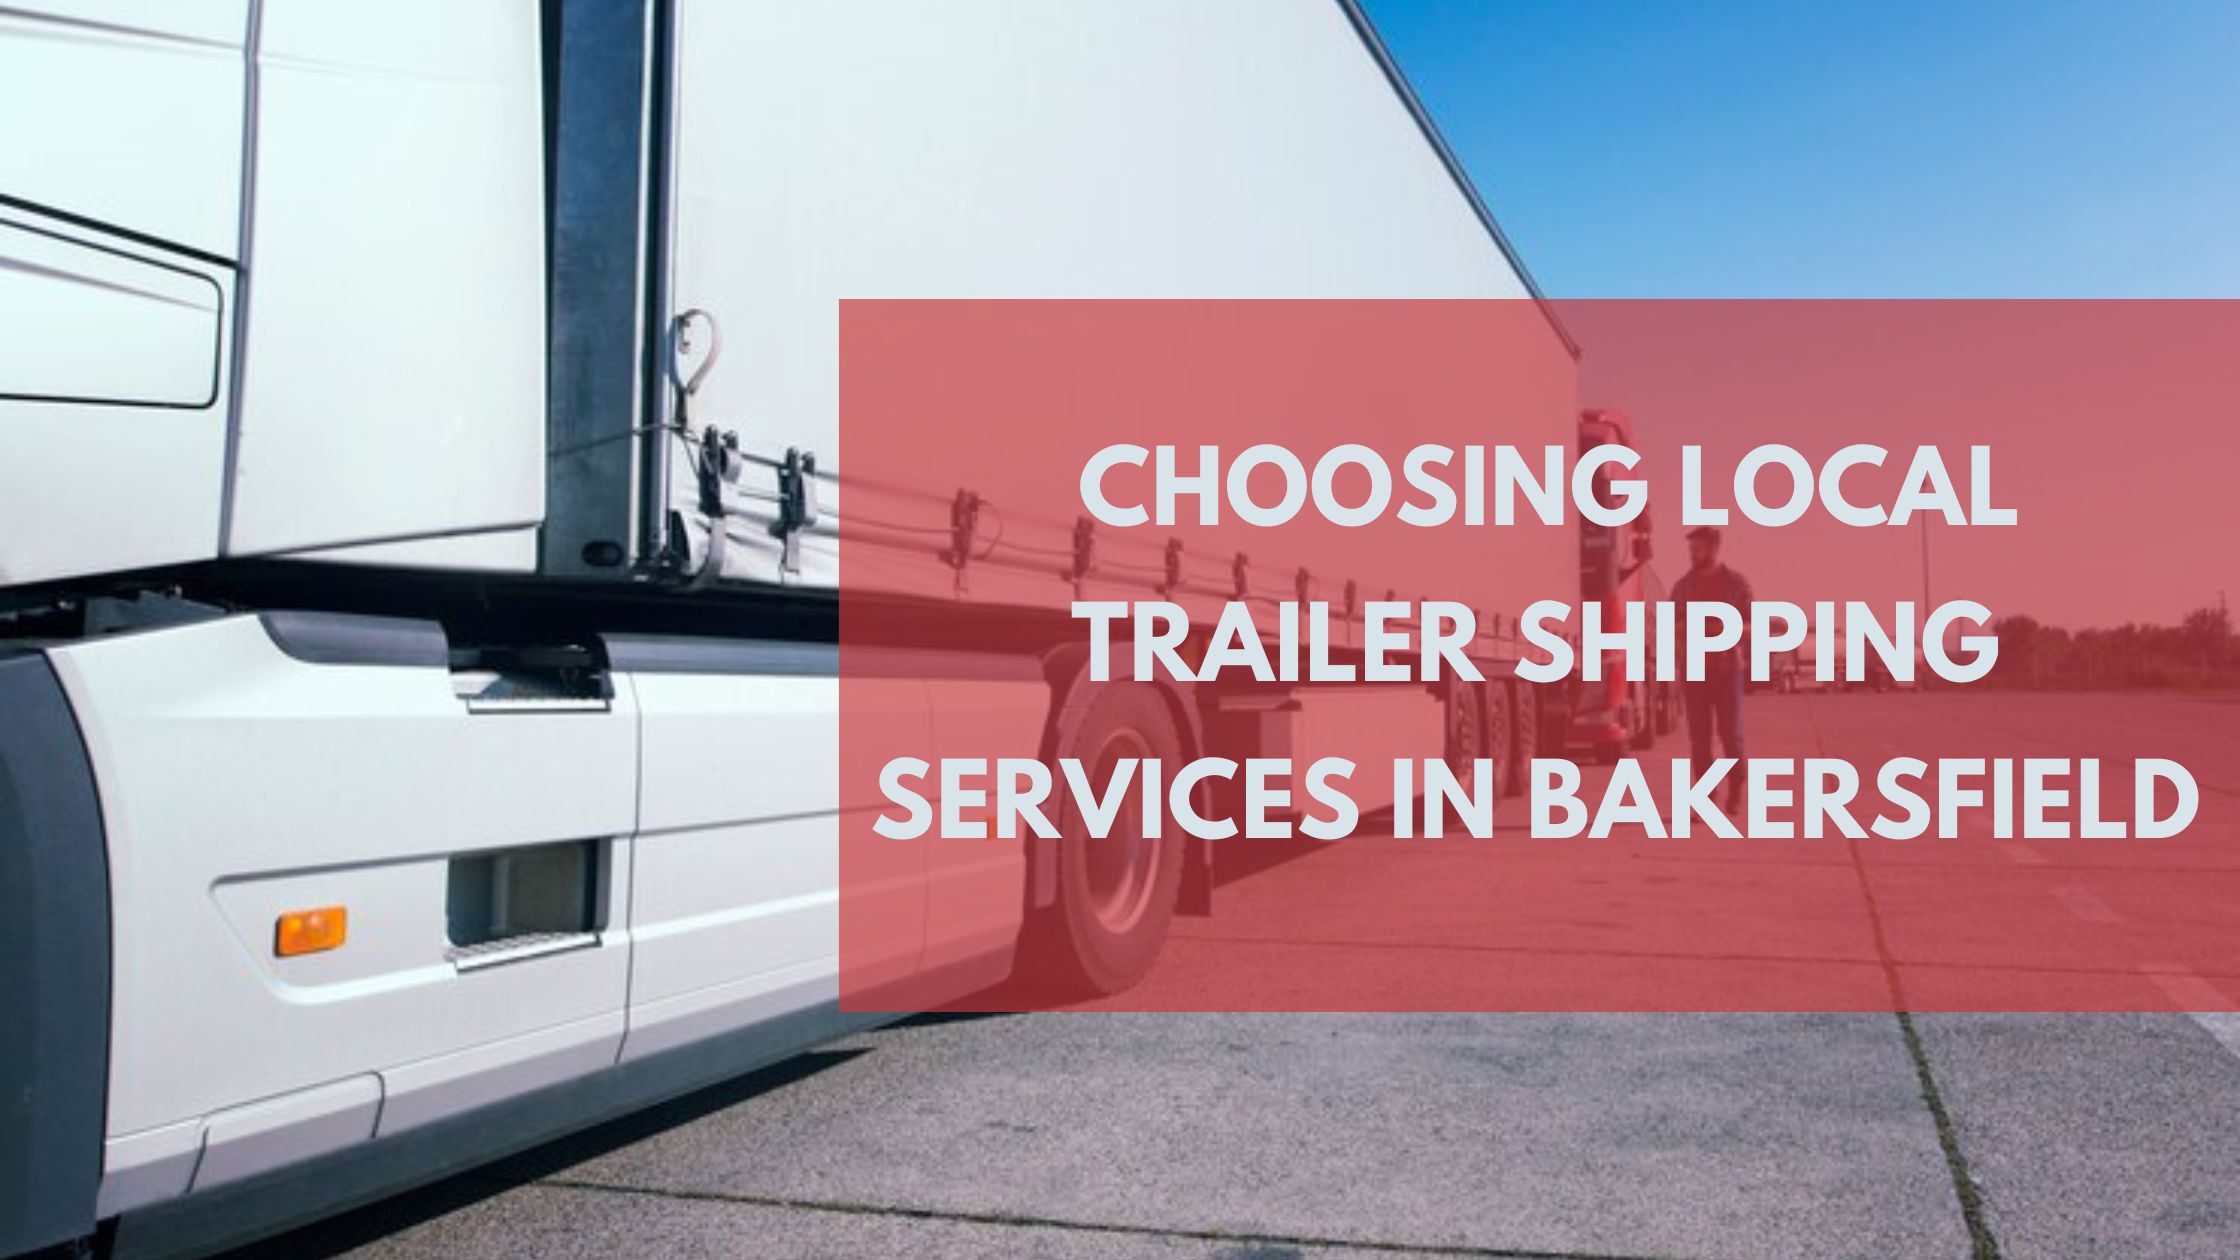 Trailer Shipping Services in Bakersfield